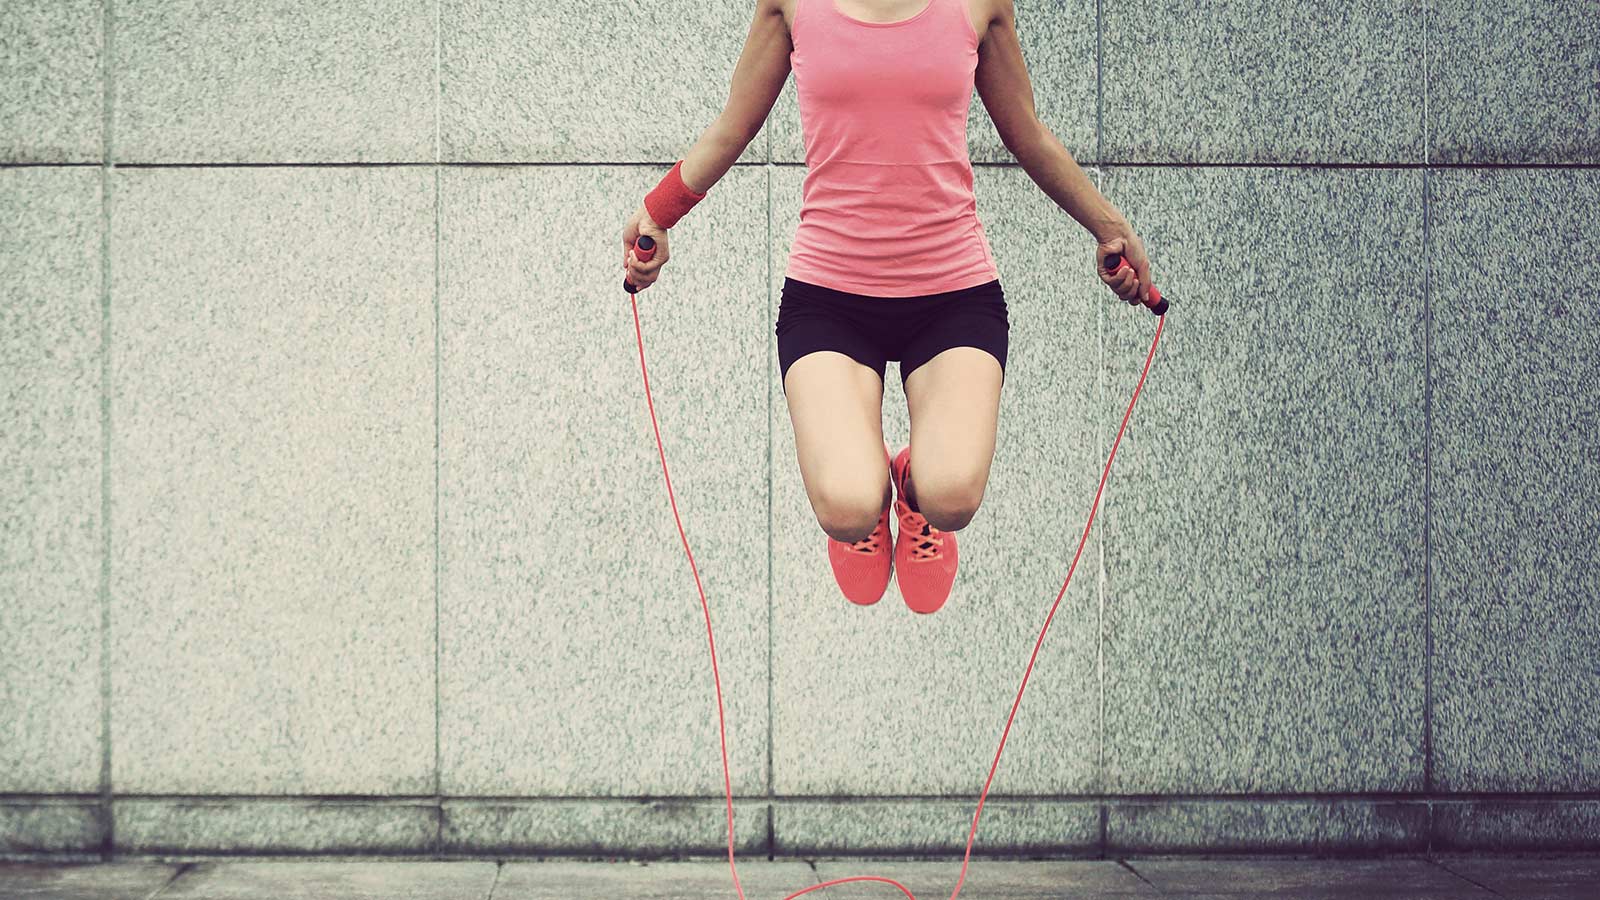 Girl skipping rope in front of wall